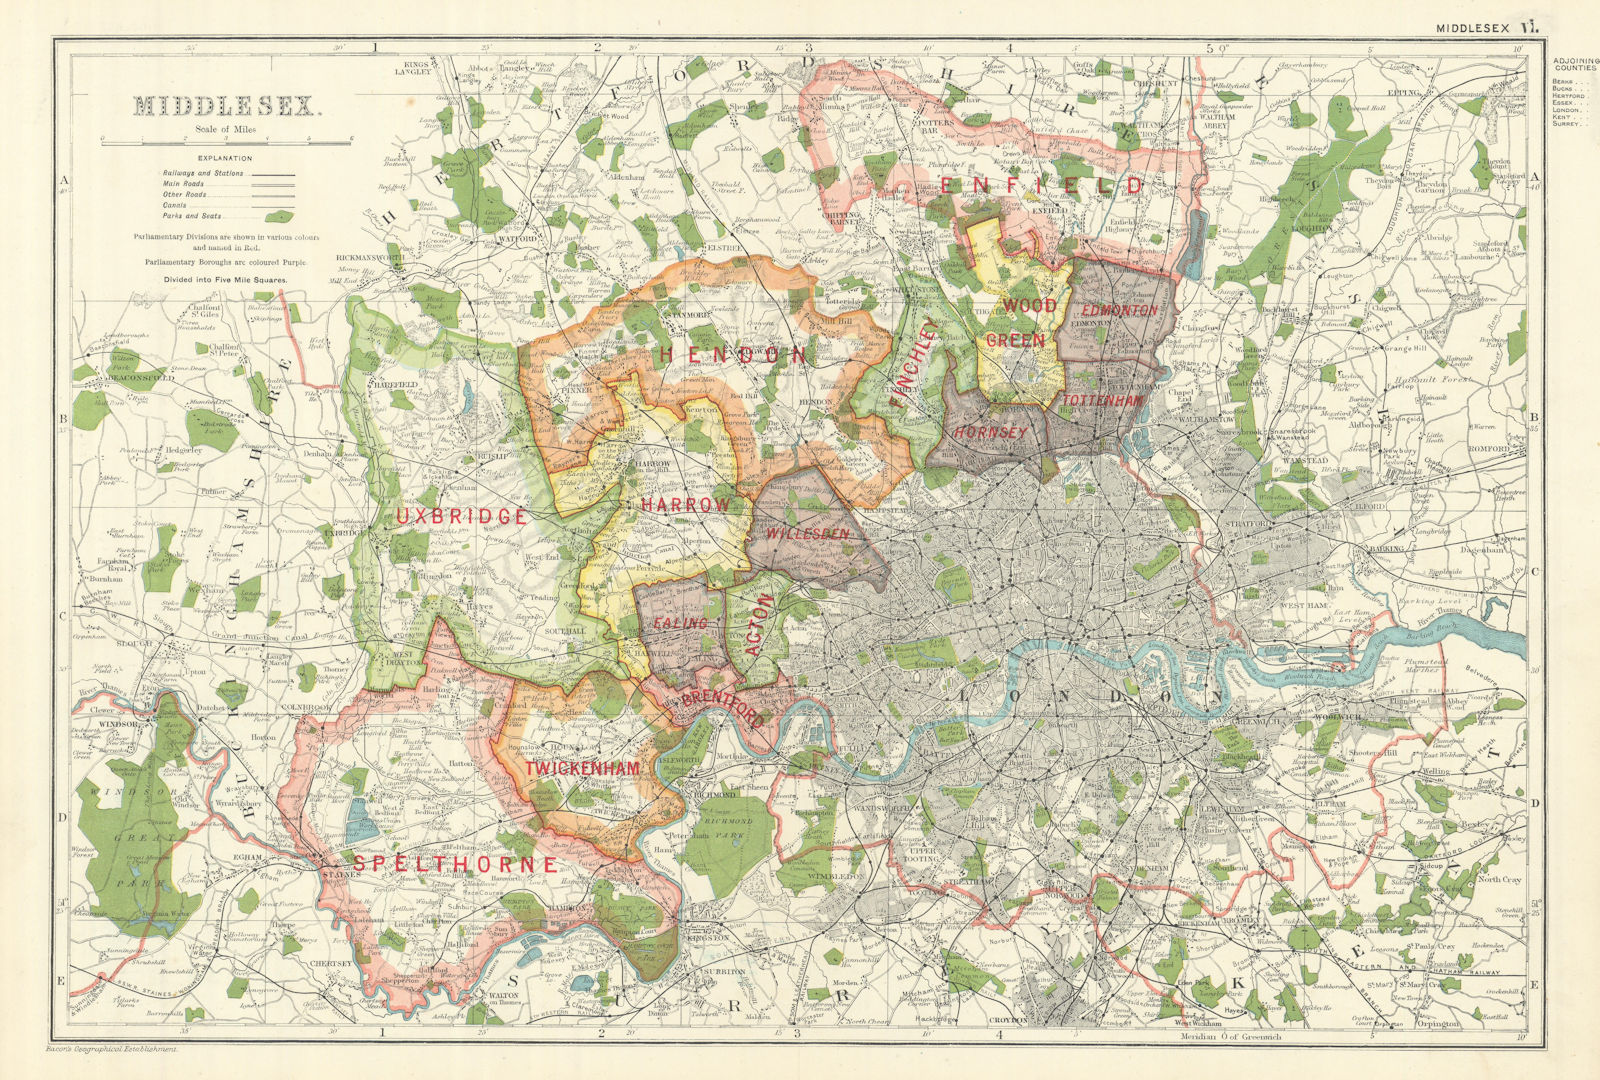 Associate Product MIDDLESEX showing Parliamentary divisions,boroughs & parks.London.BACON 1919 map